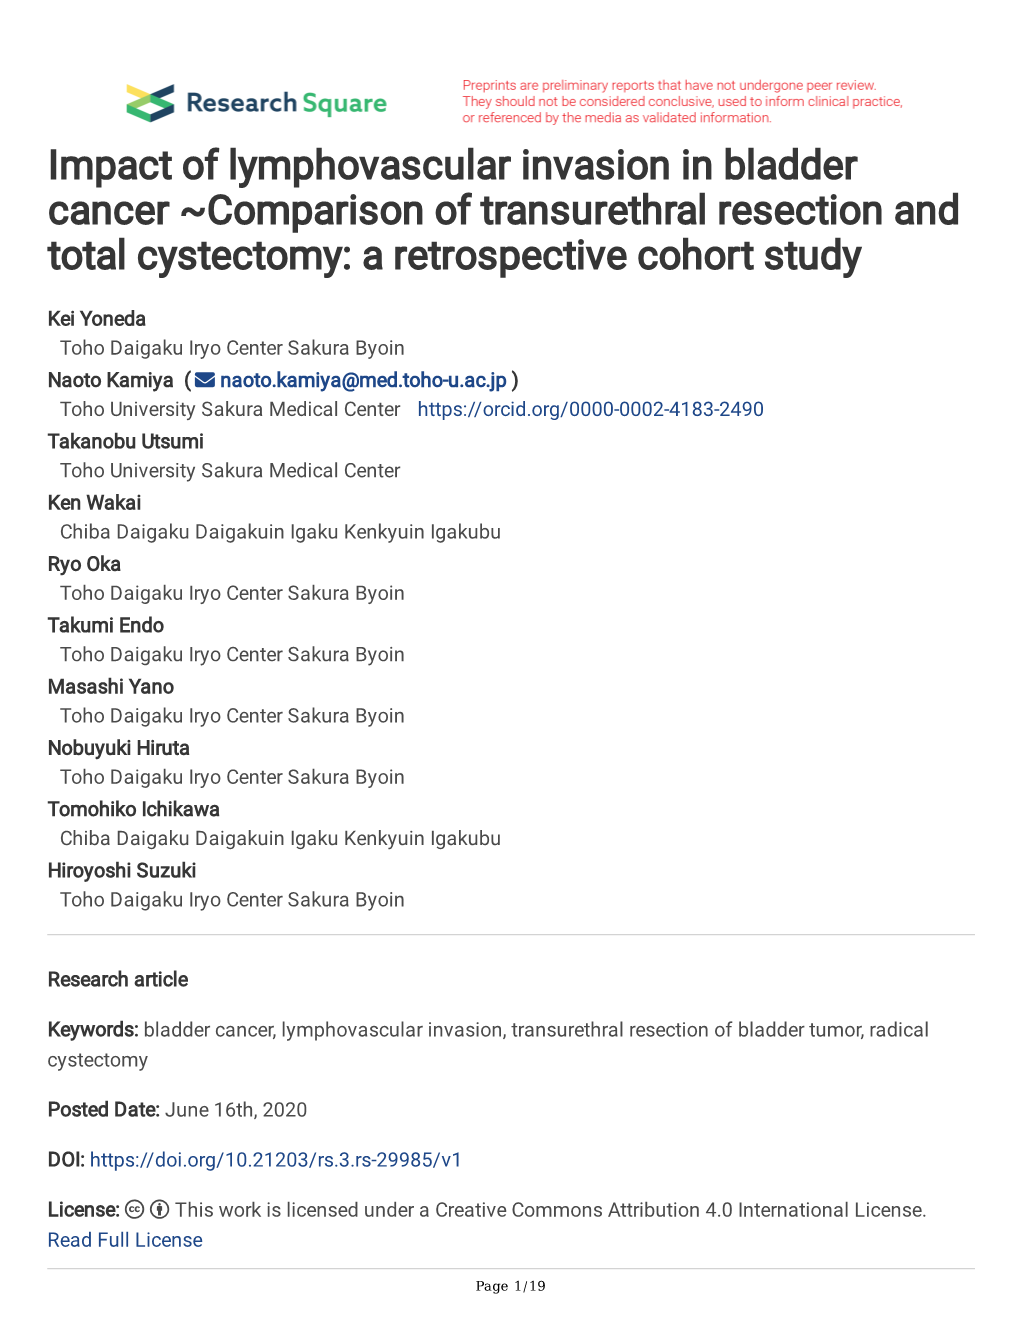 Impact of Lymphovascular Invasion in Bladder Cancer ~Comparison of Transurethral Resection and Total Cystectomy: a Retrospective Cohort Study